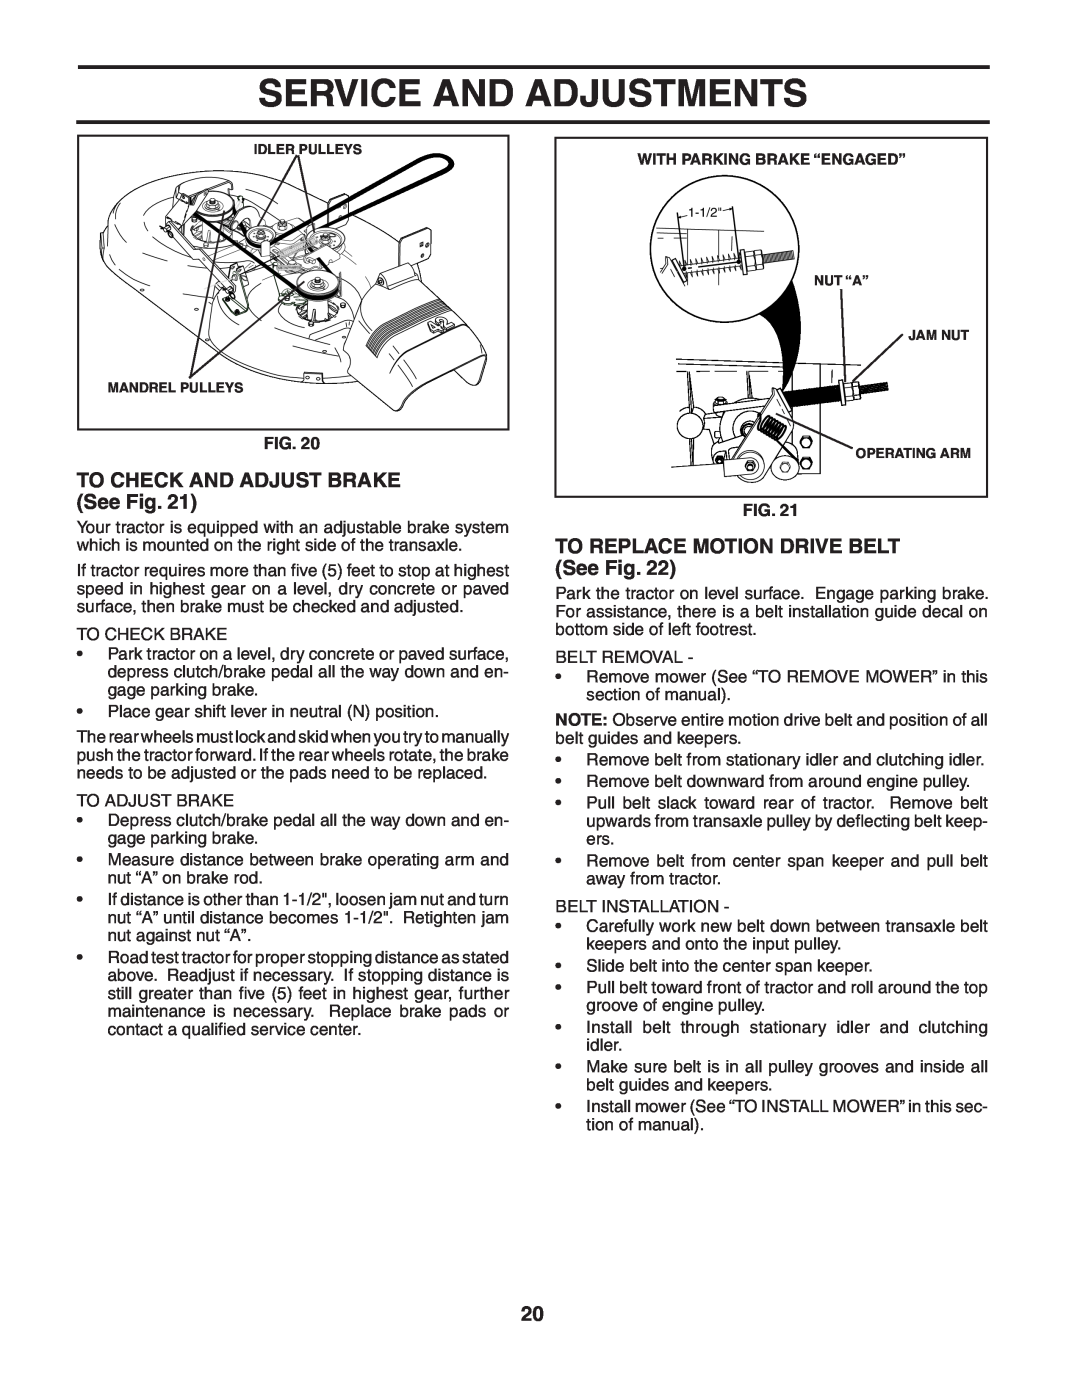 Poulan 187594 manual TO CHECK AND ADJUST BRAKE See Fig, TO REPLACE MOTION DRIVE BELT See Fig, Service And Adjustments 